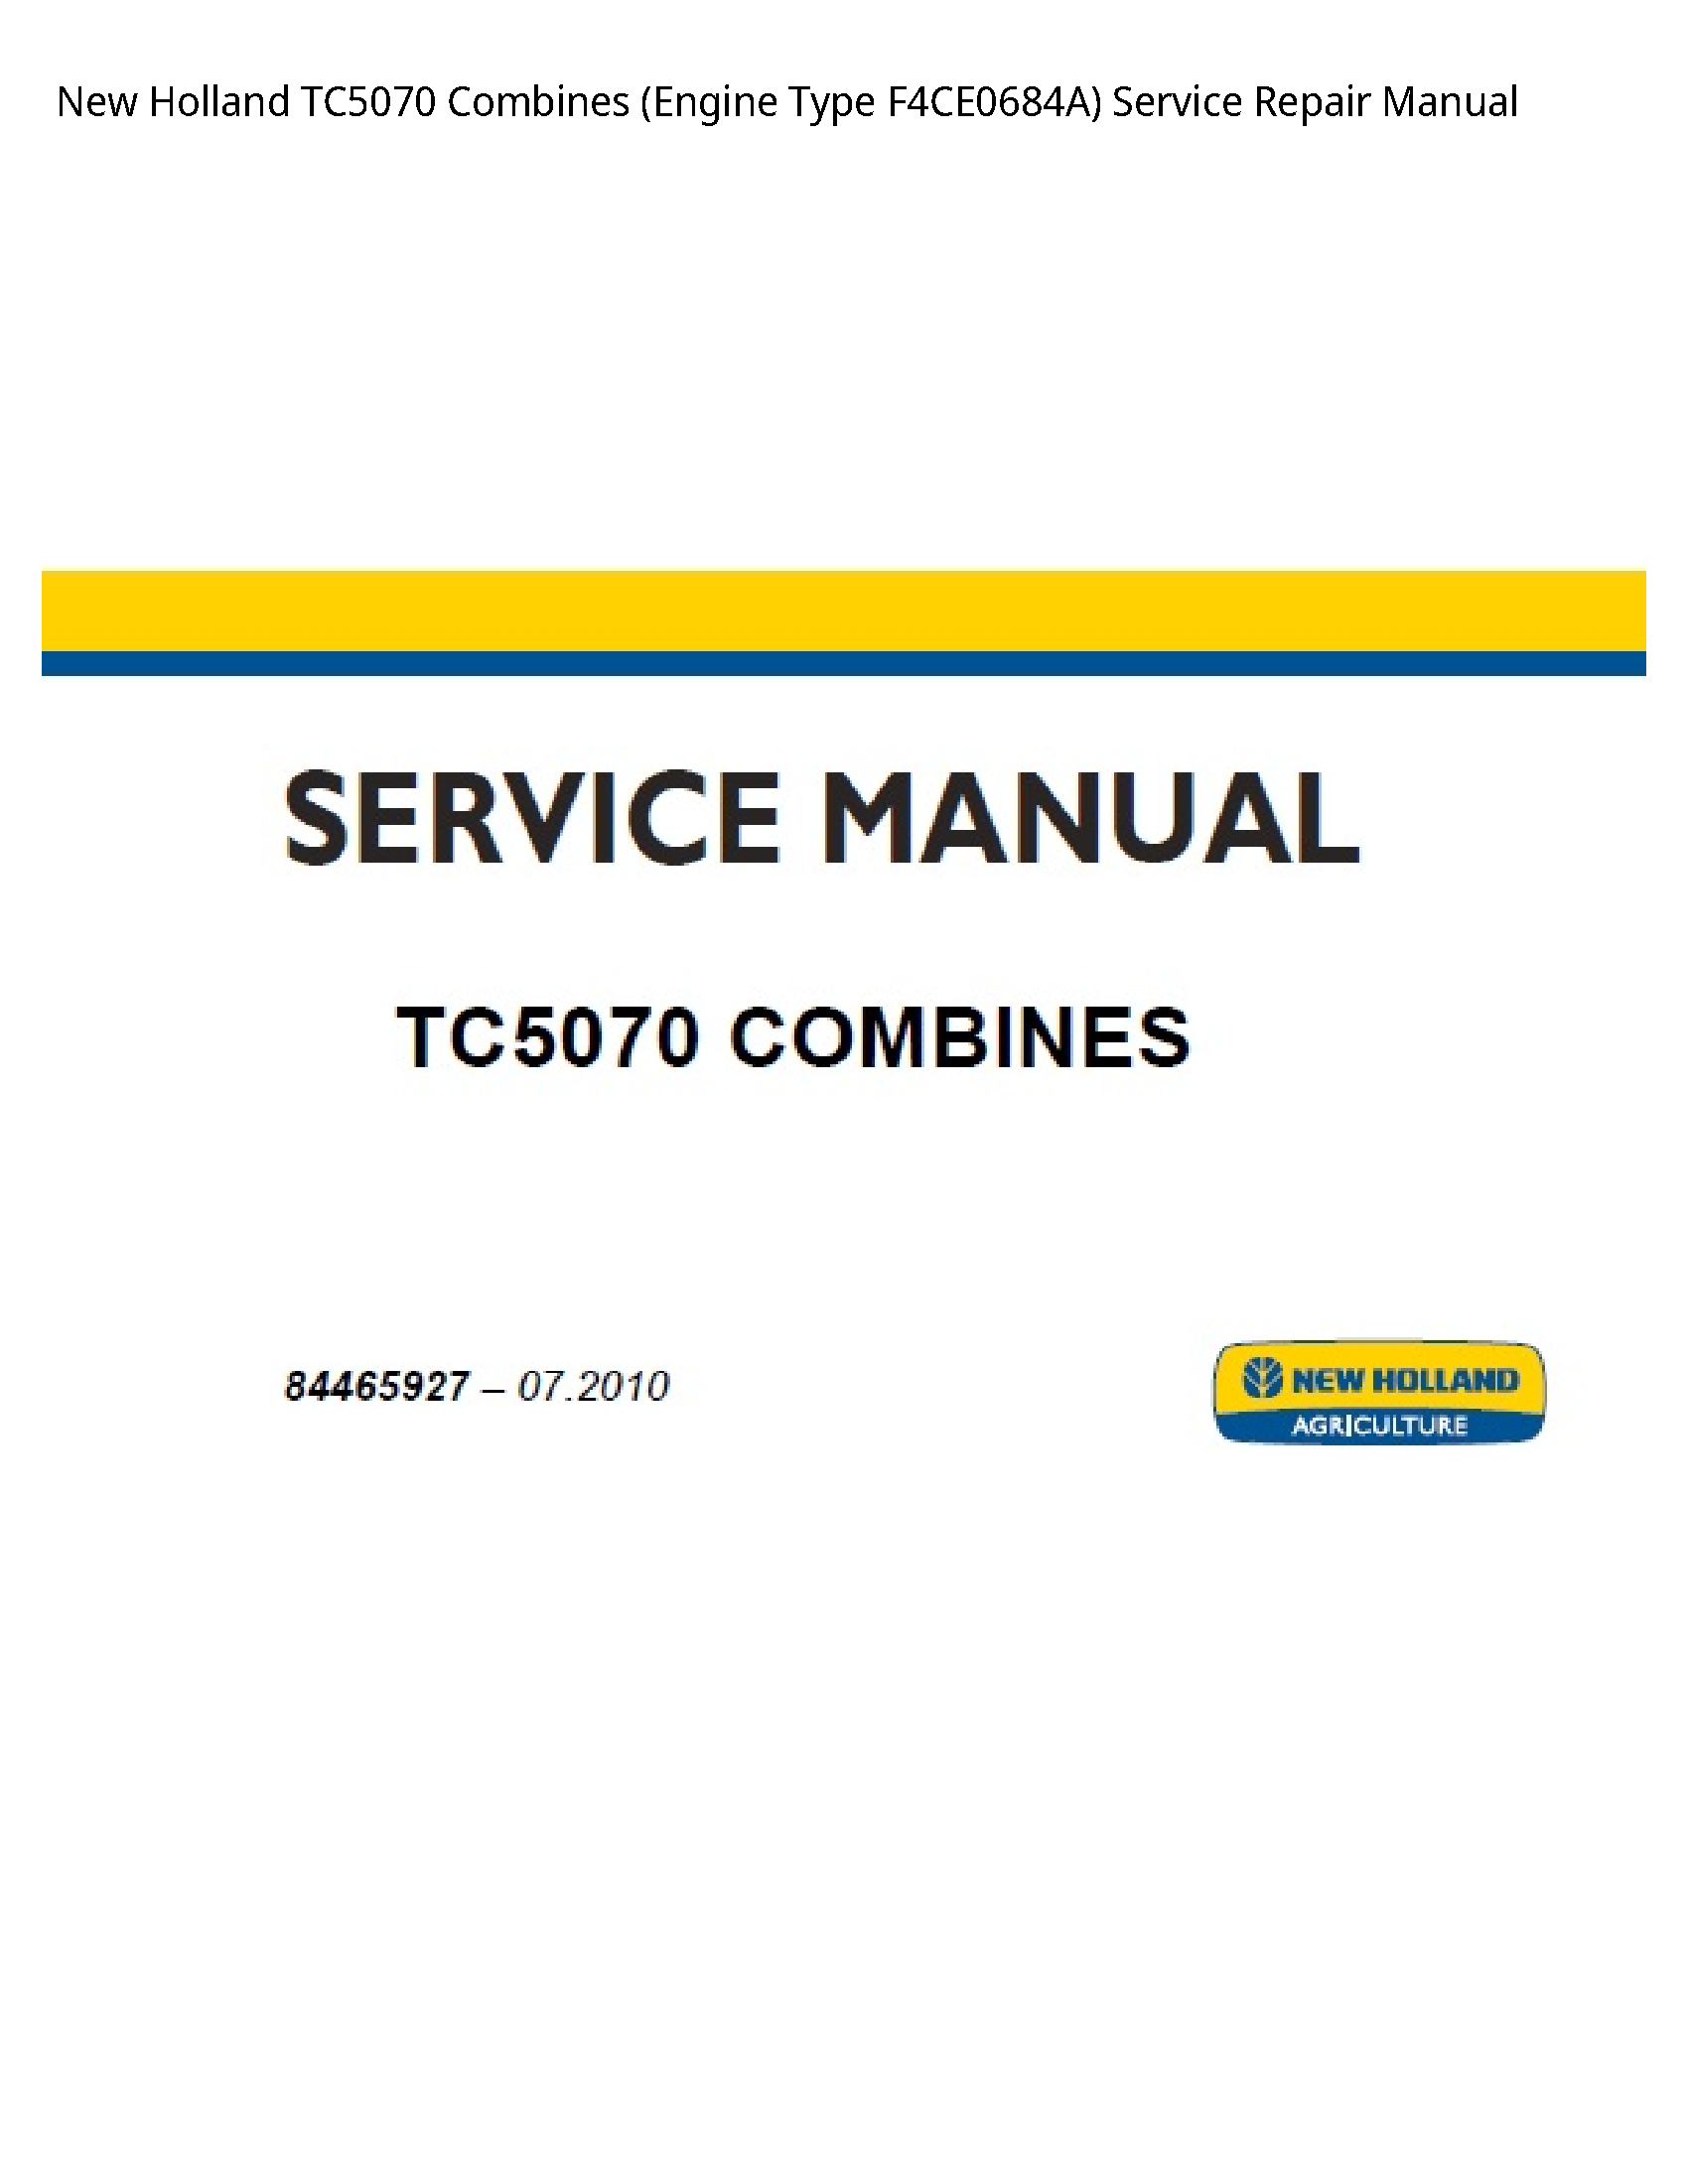 New Holland TC5070 Combines (Engine Type manual